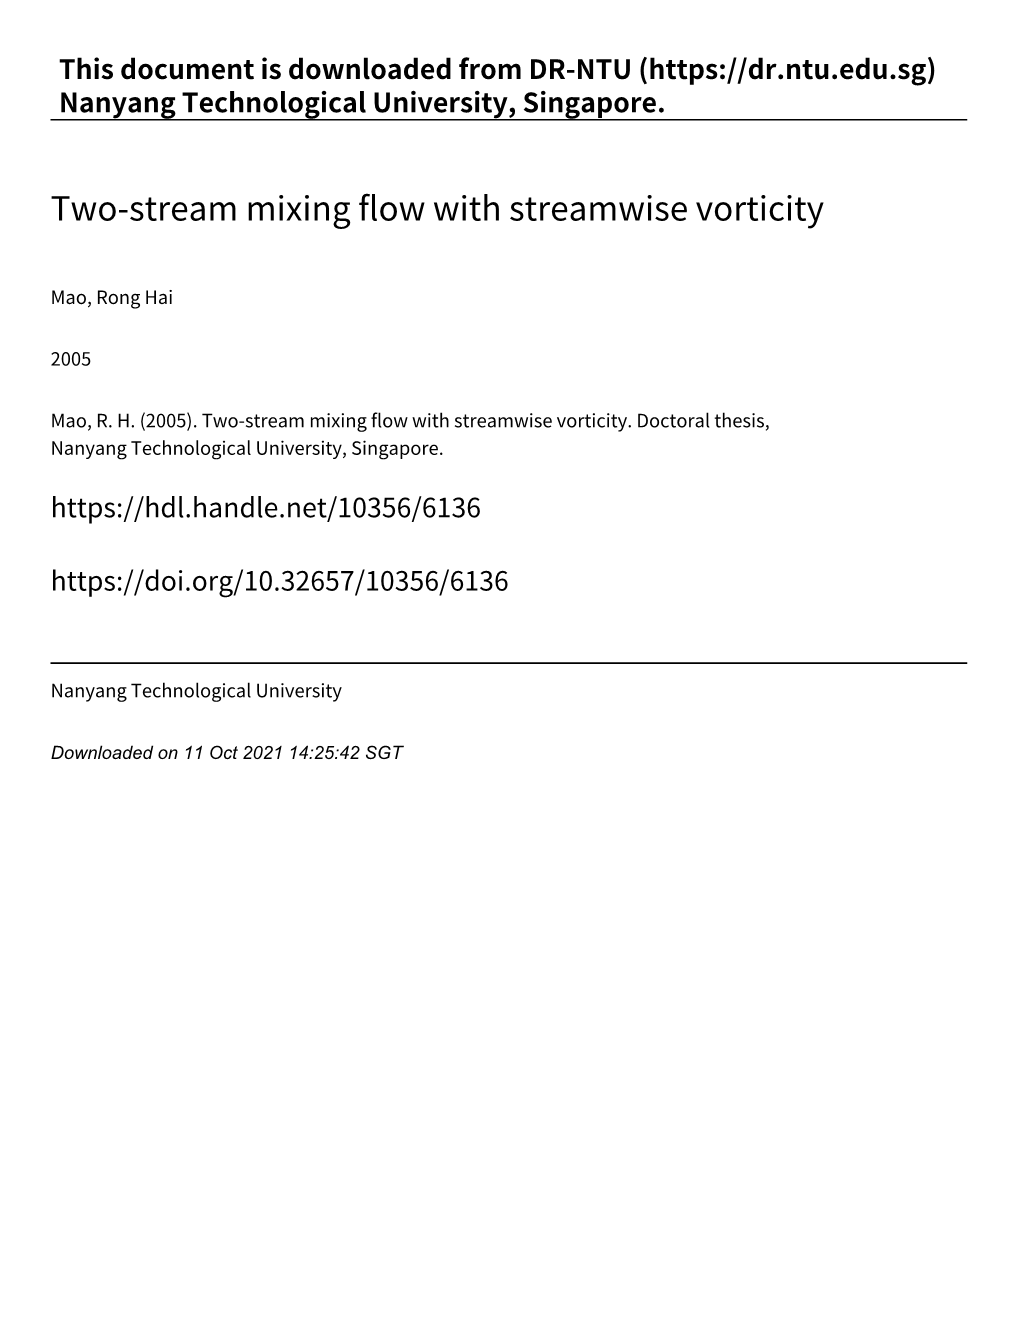 Two‑Stream Mixing Flow with Streamwise Vorticity